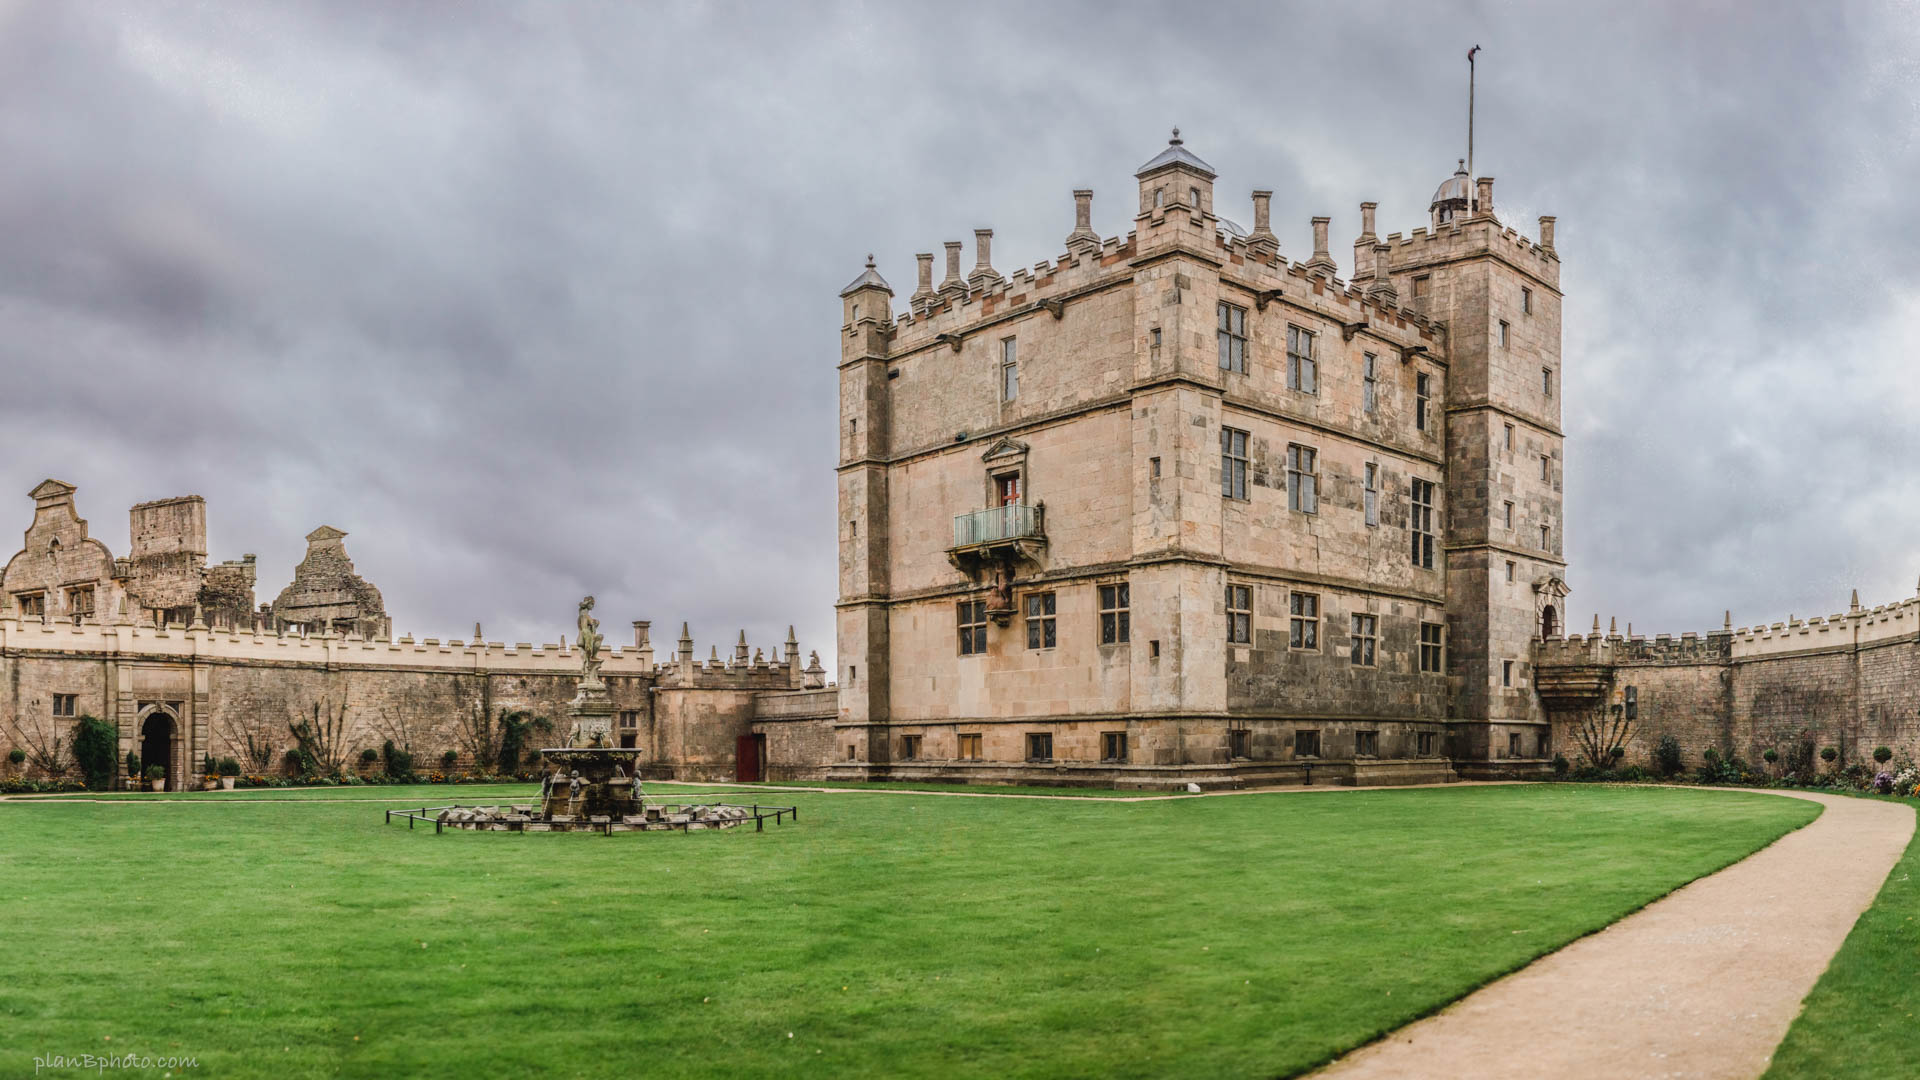 Image of Bolsover castle with dark clouds around